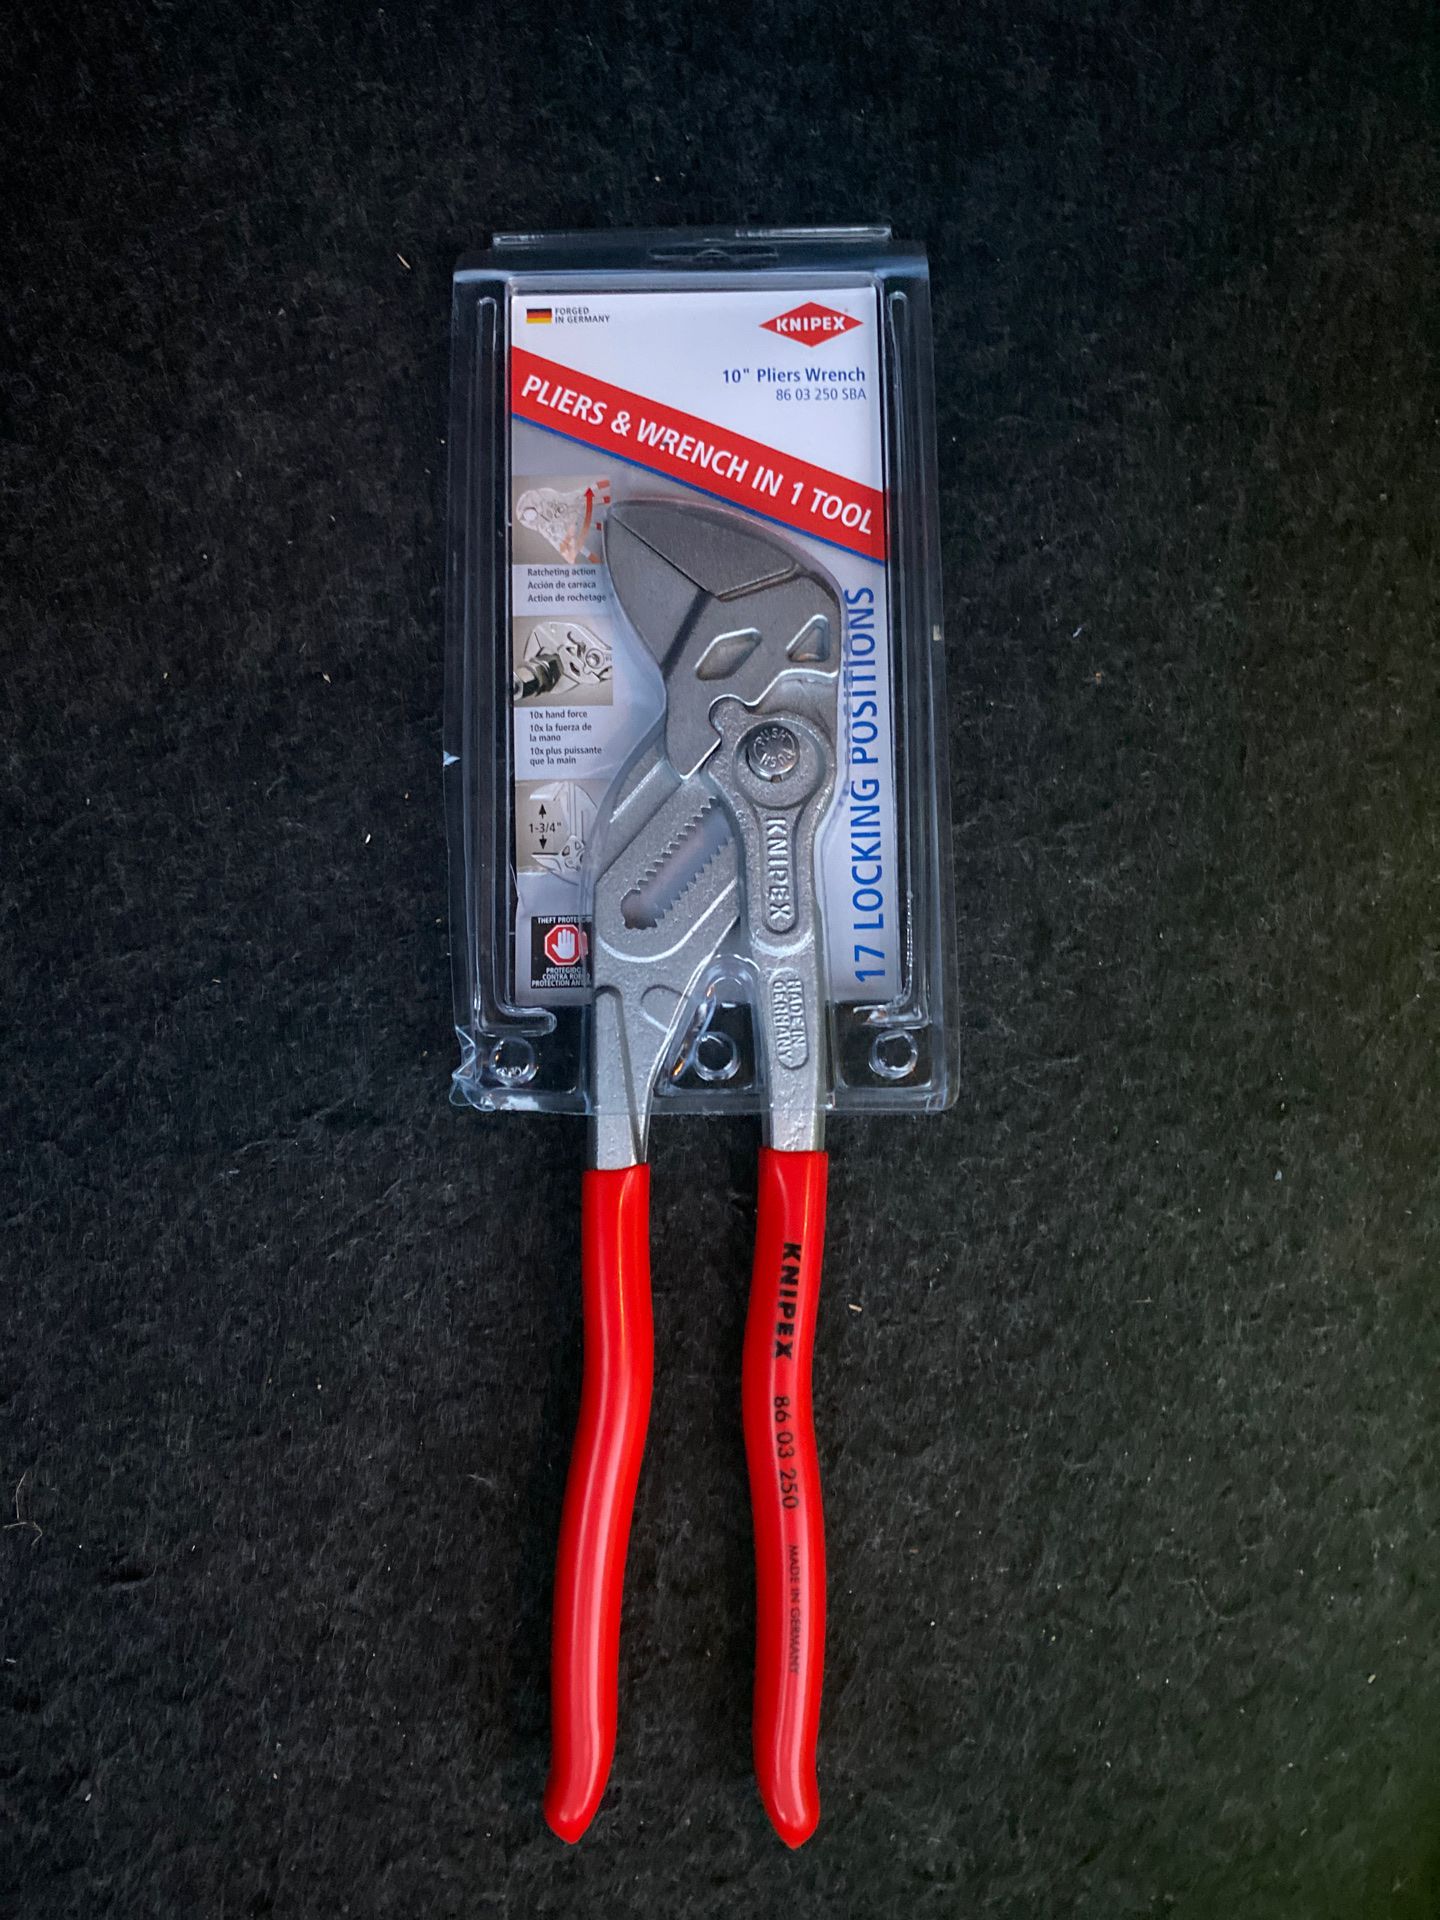 Knipex Pliers & Wrench In 1